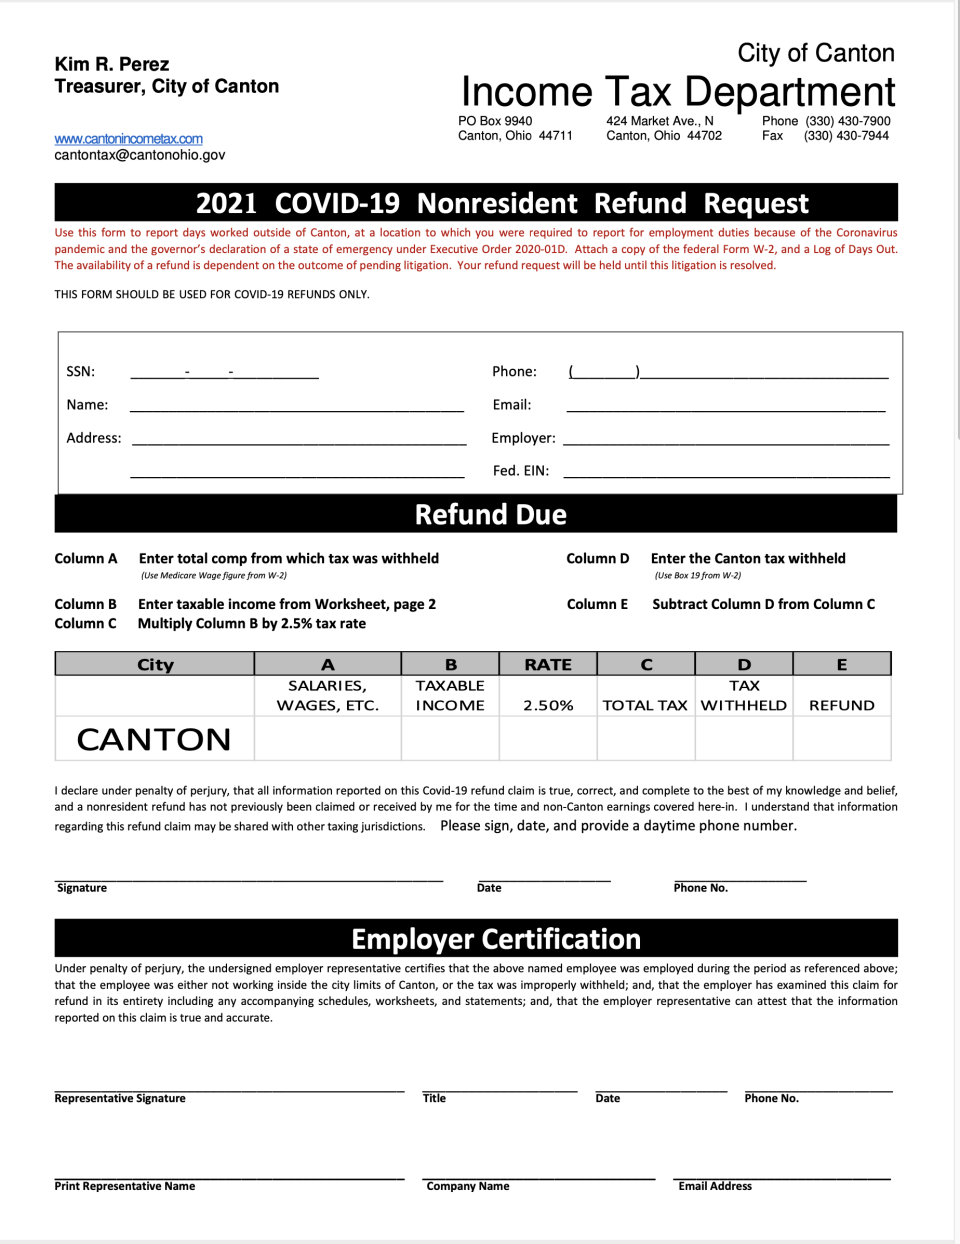 The city of Canton's income tax department has issued a form where taxpayers can request refunds of taxes withheld to the city for time worked outside of Canton.